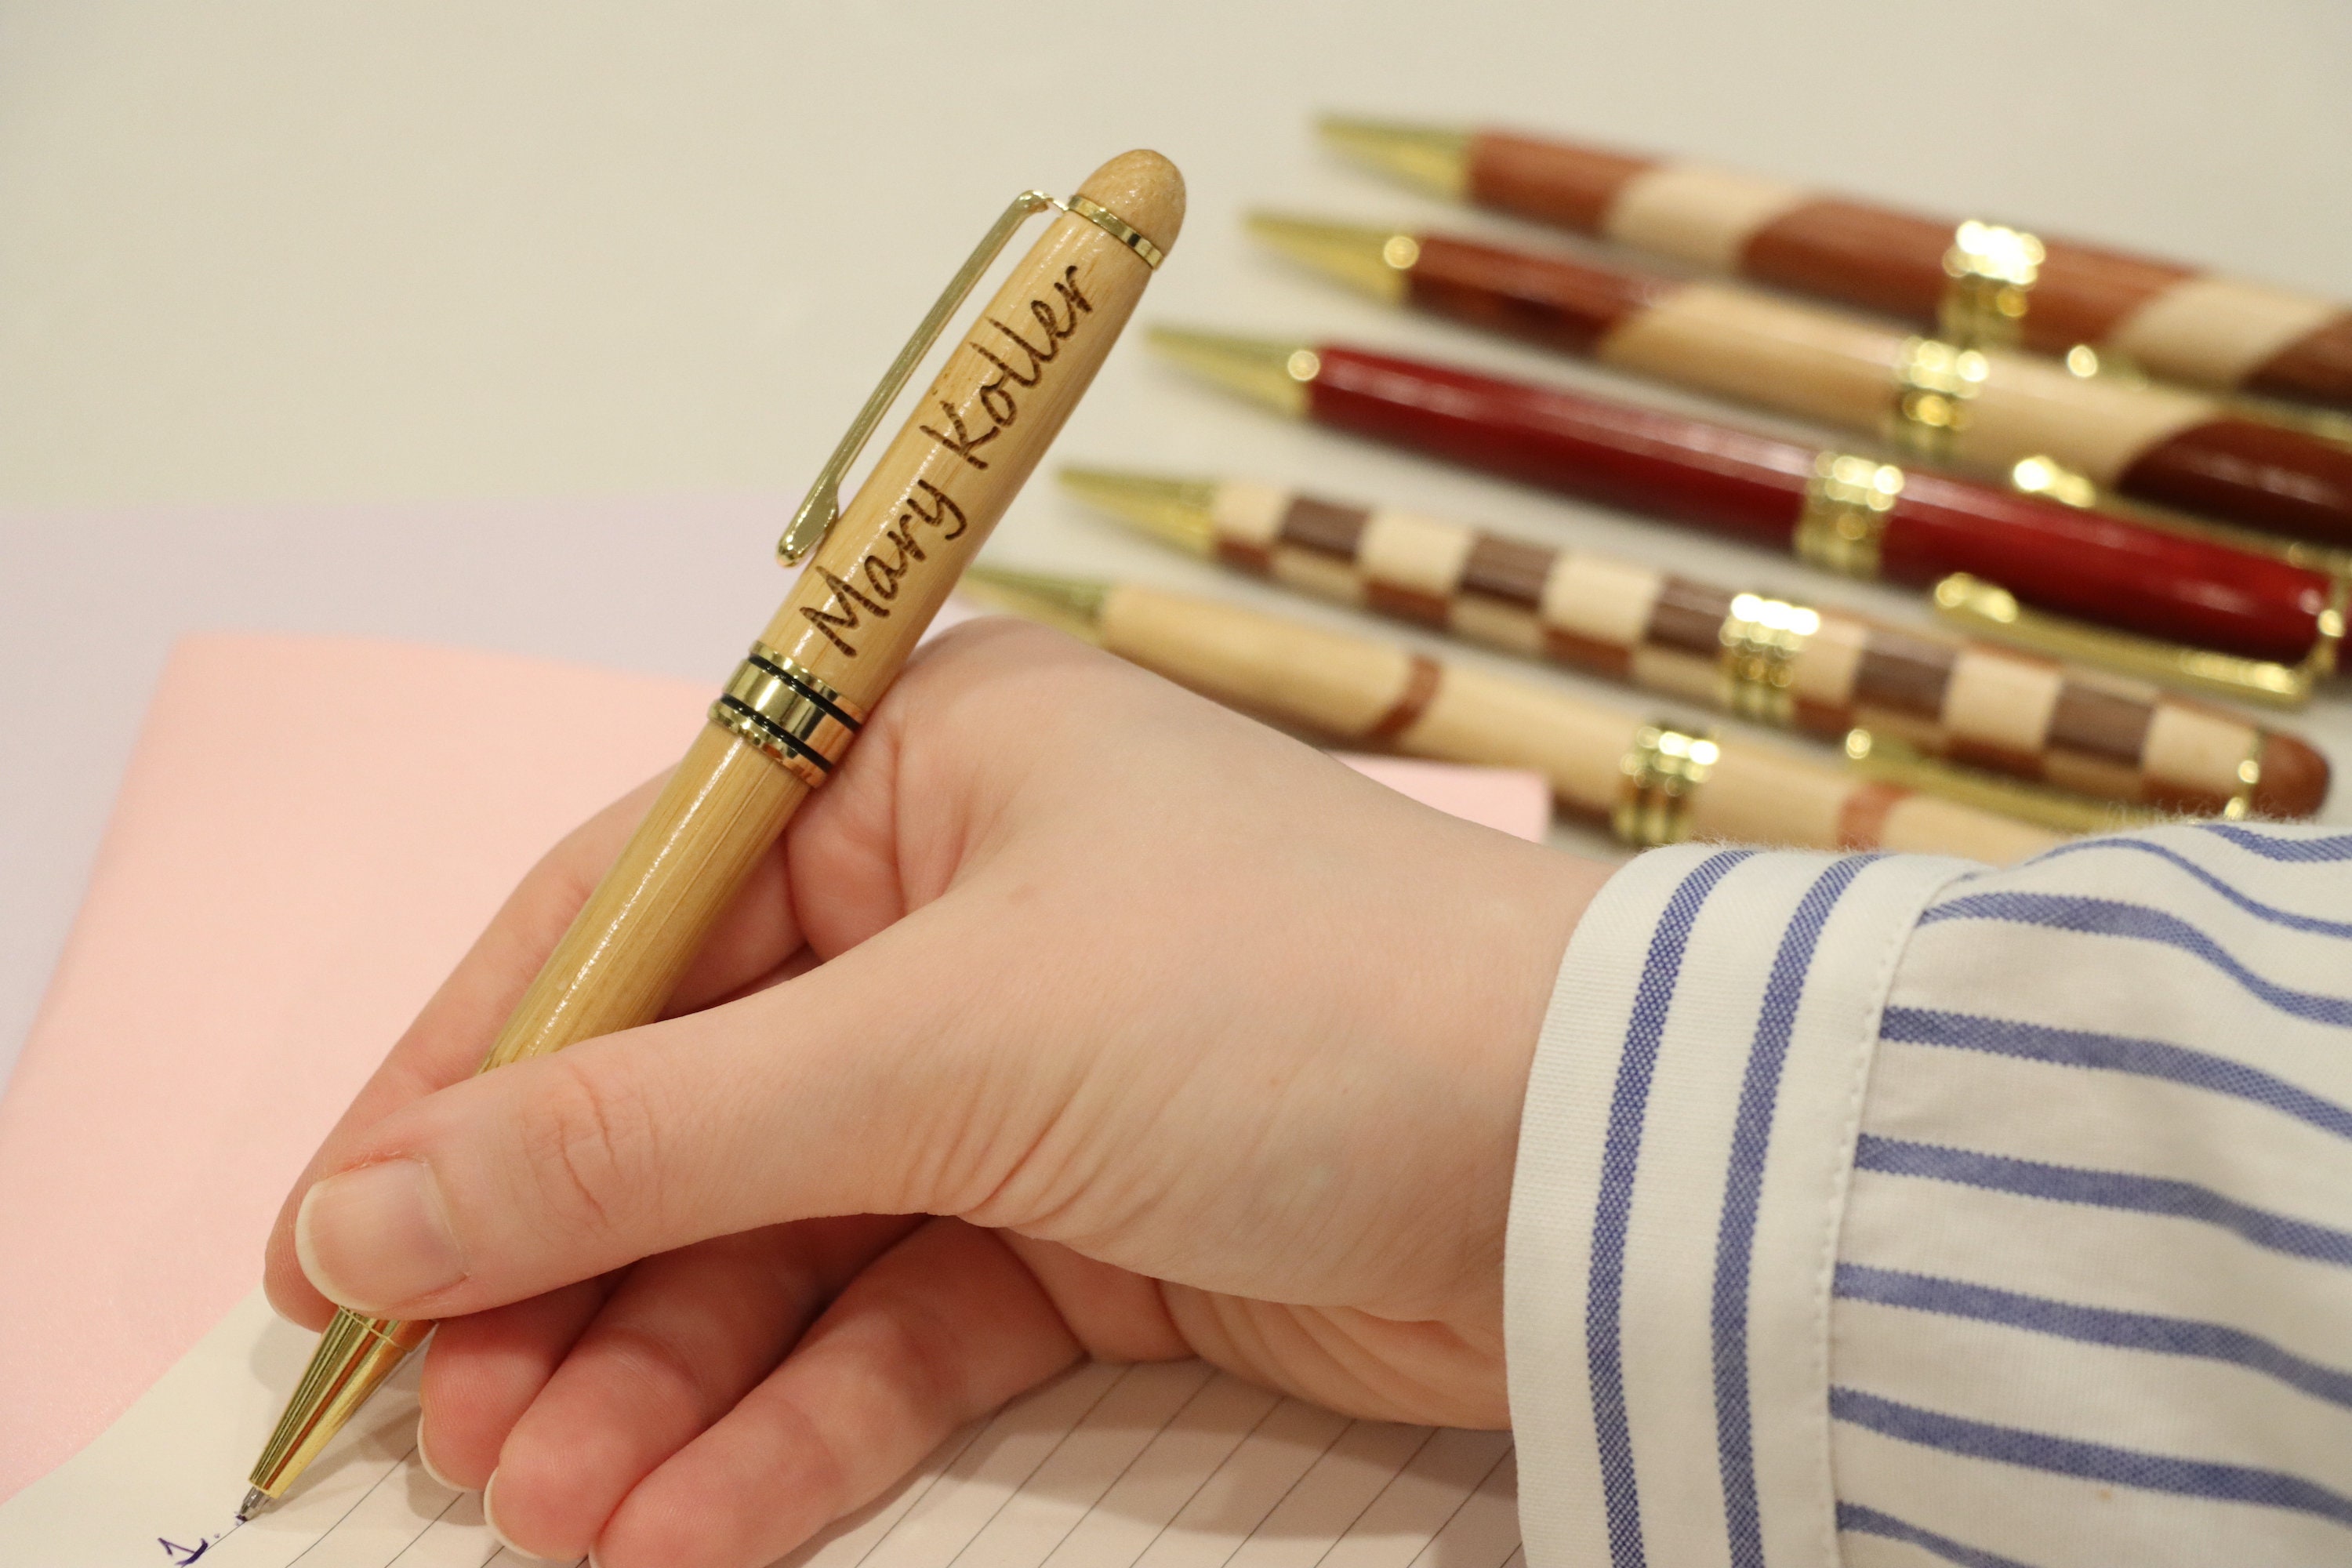  WSLHFEO Personalized Pen Sets for Realtors. : Arts, Crafts &  Sewing